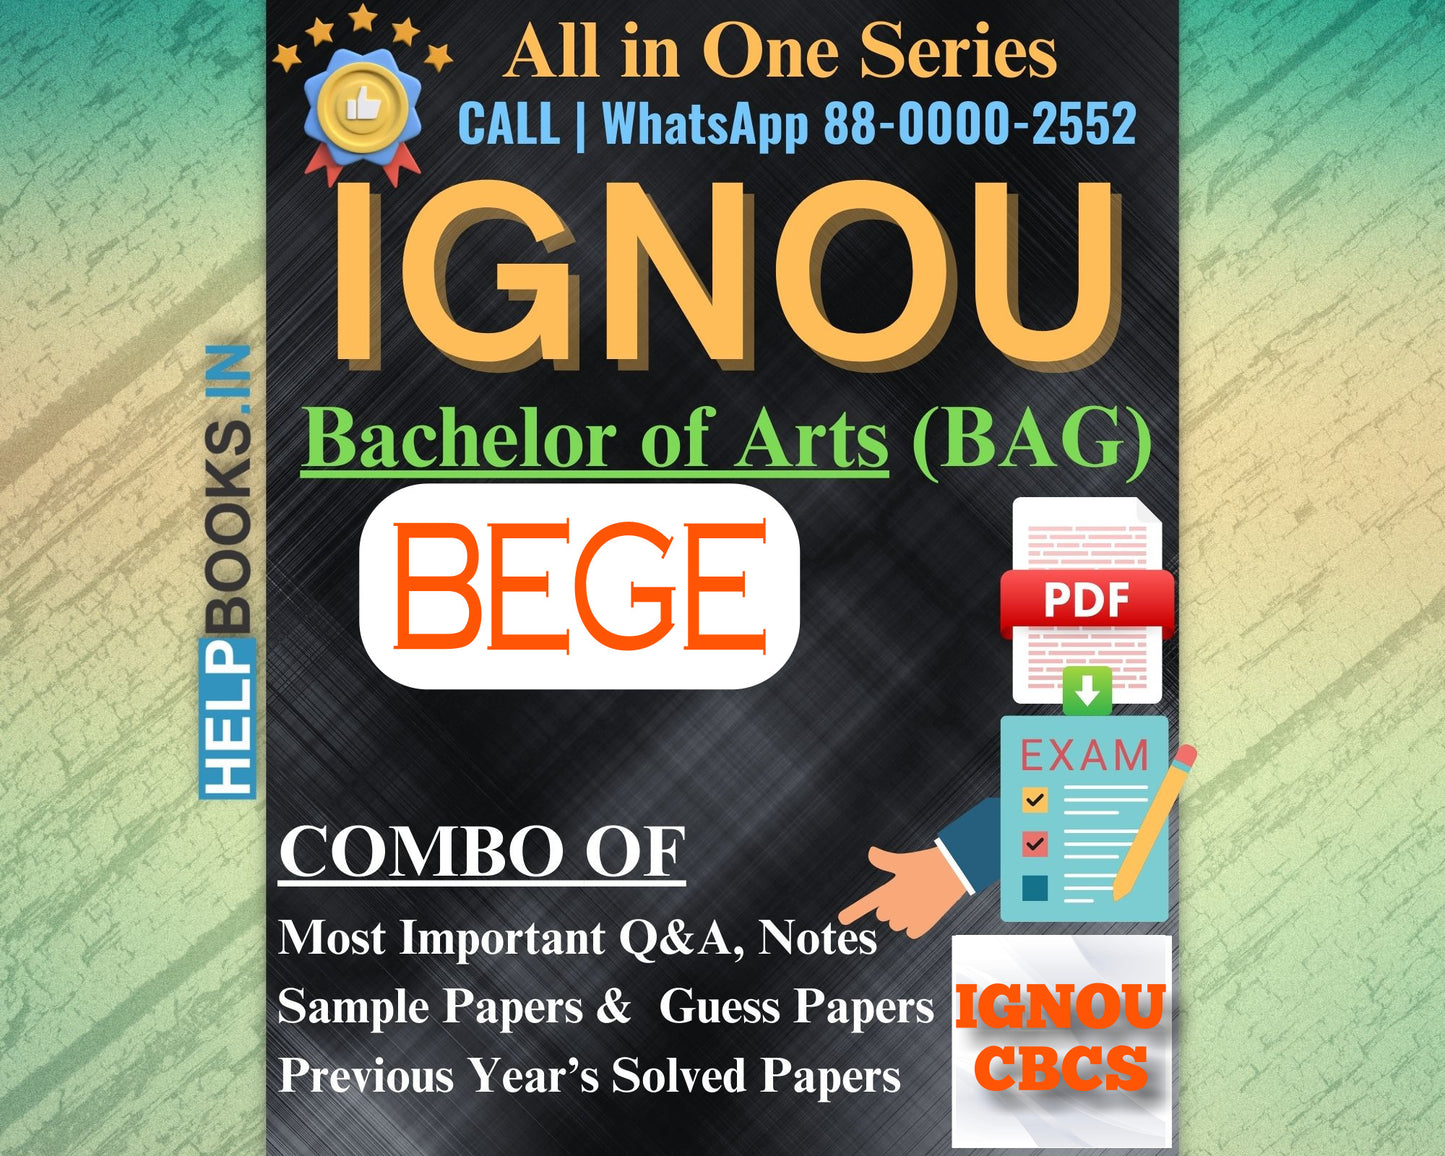 IGNOU BAG Online Study Package: Bachelor of Arts (BA) - Previous Year’s Solved Papers, Q&A, Exam Notes, Sample Papers, Guess Papers-BEGE141, BEGE142, BEGE143, BEGE144, BEGE145